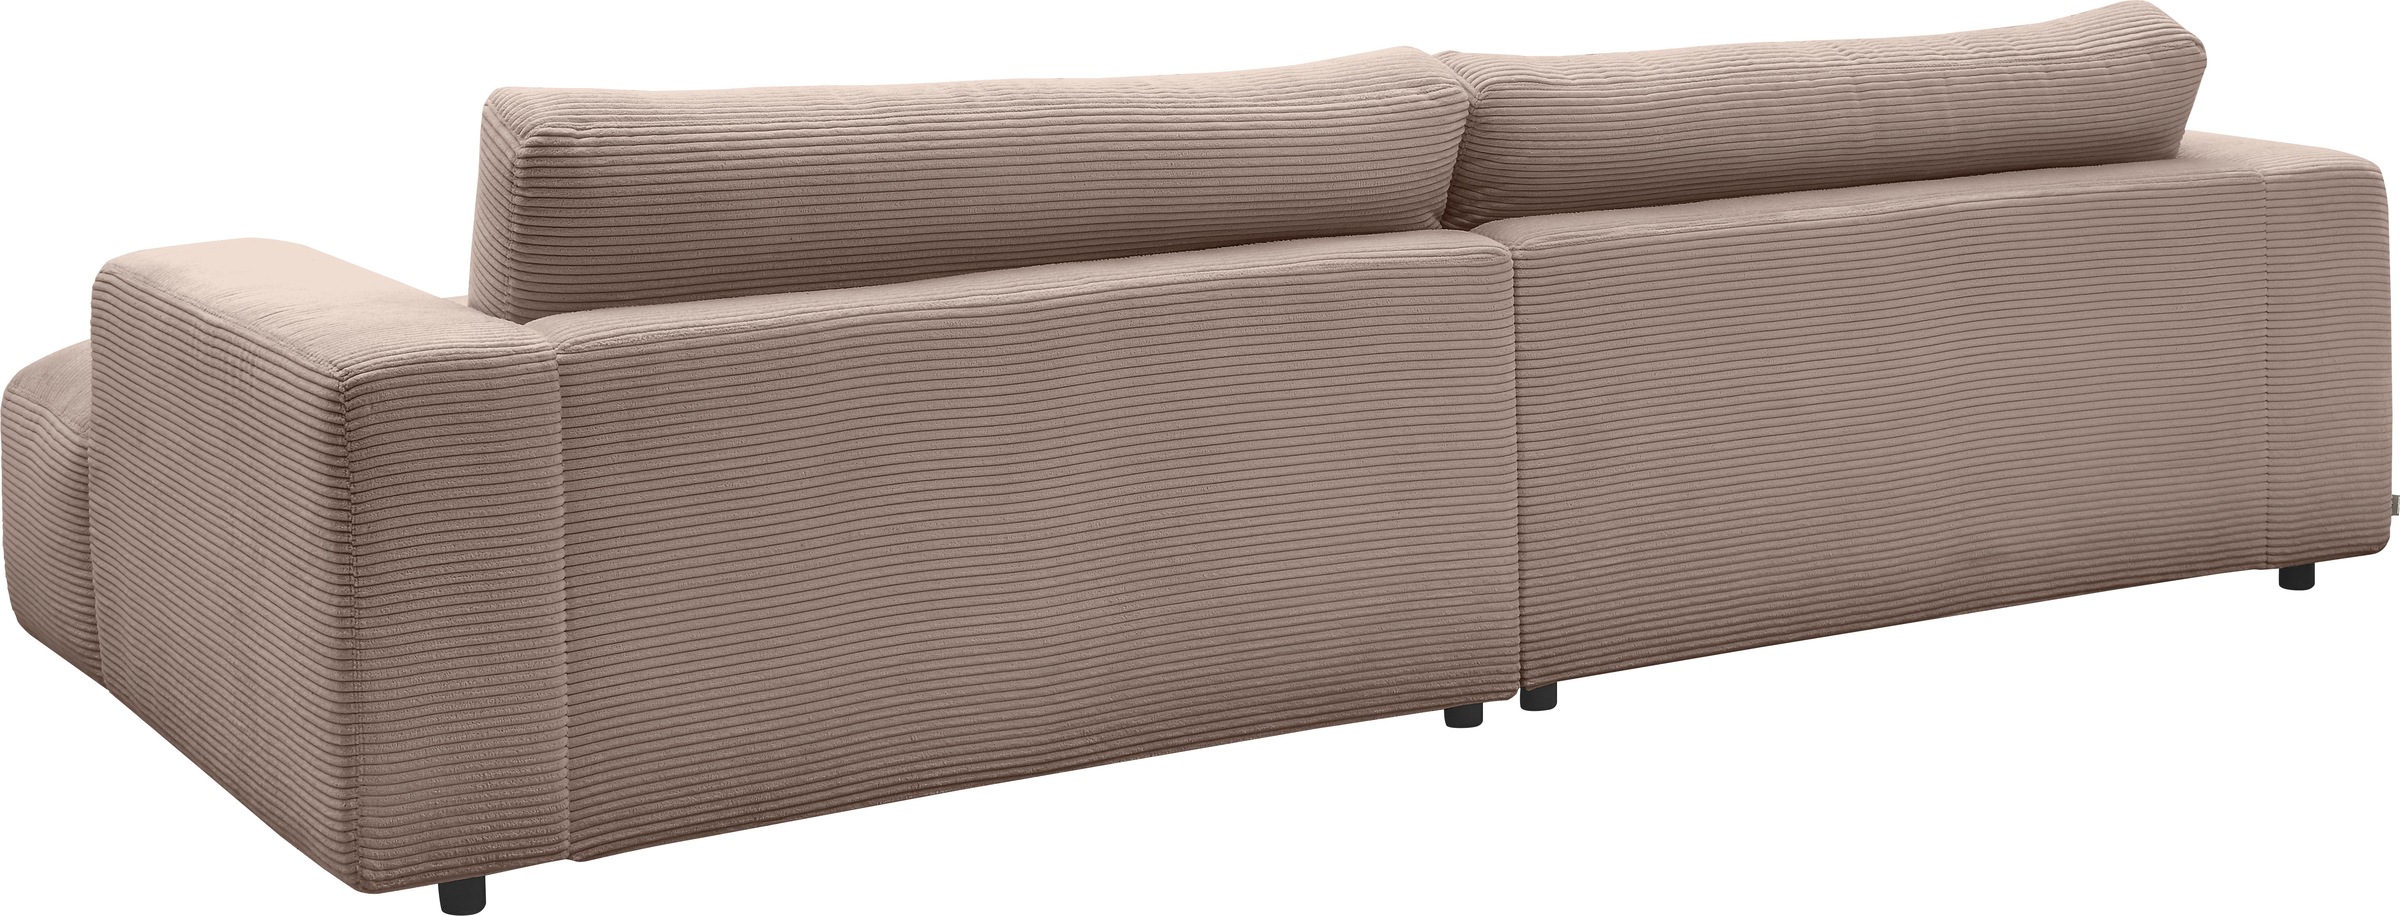 Breite »Lucia«, M by Online Shop branded 292 OTTO cm GALLERY Musterring Loungesofa Cord-Bezug,